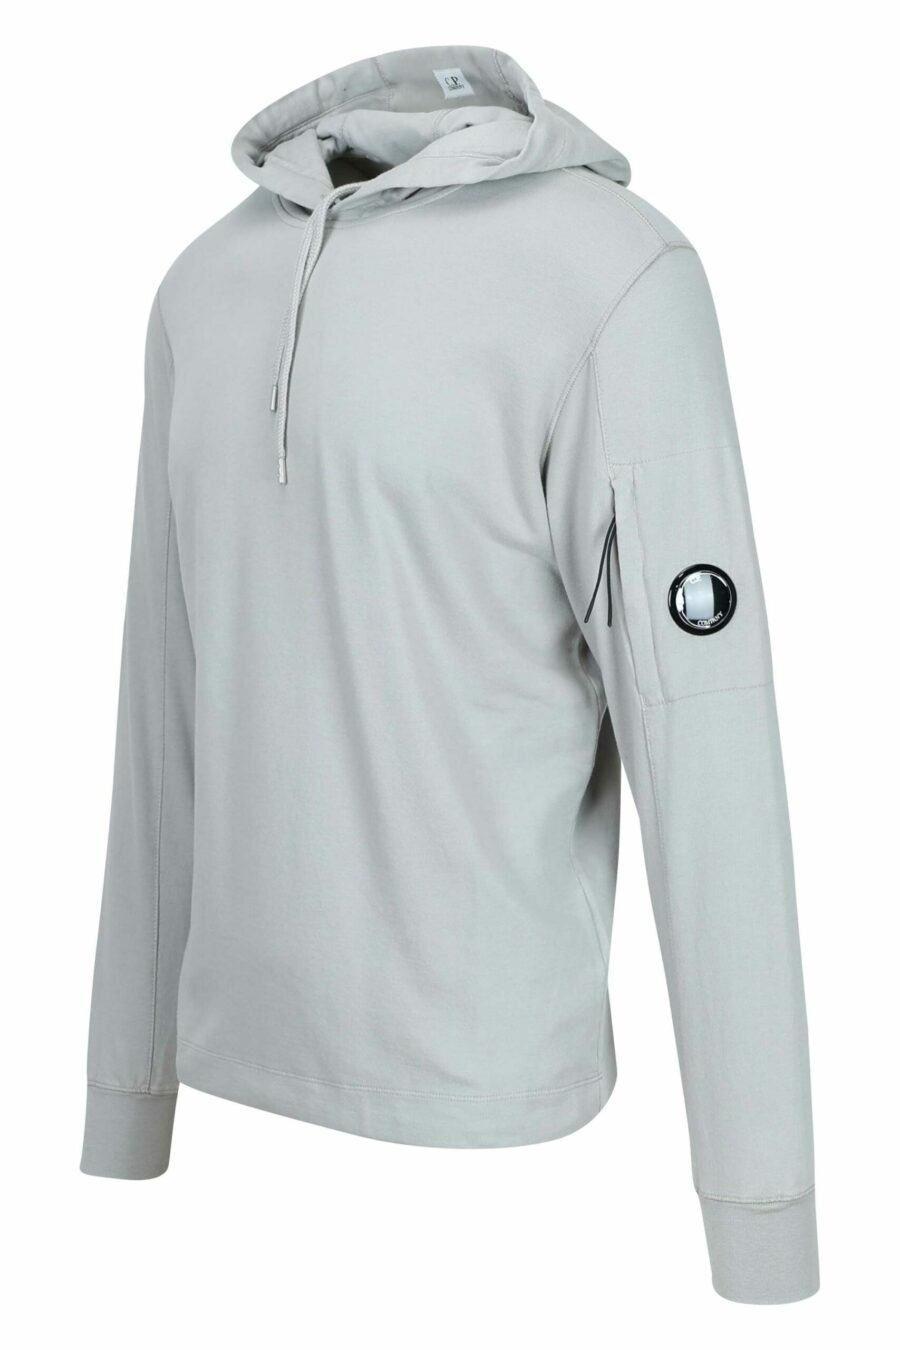 Grey hooded sweatshirt with mini-logo lens in pocket - 7620943681031 1 scaled